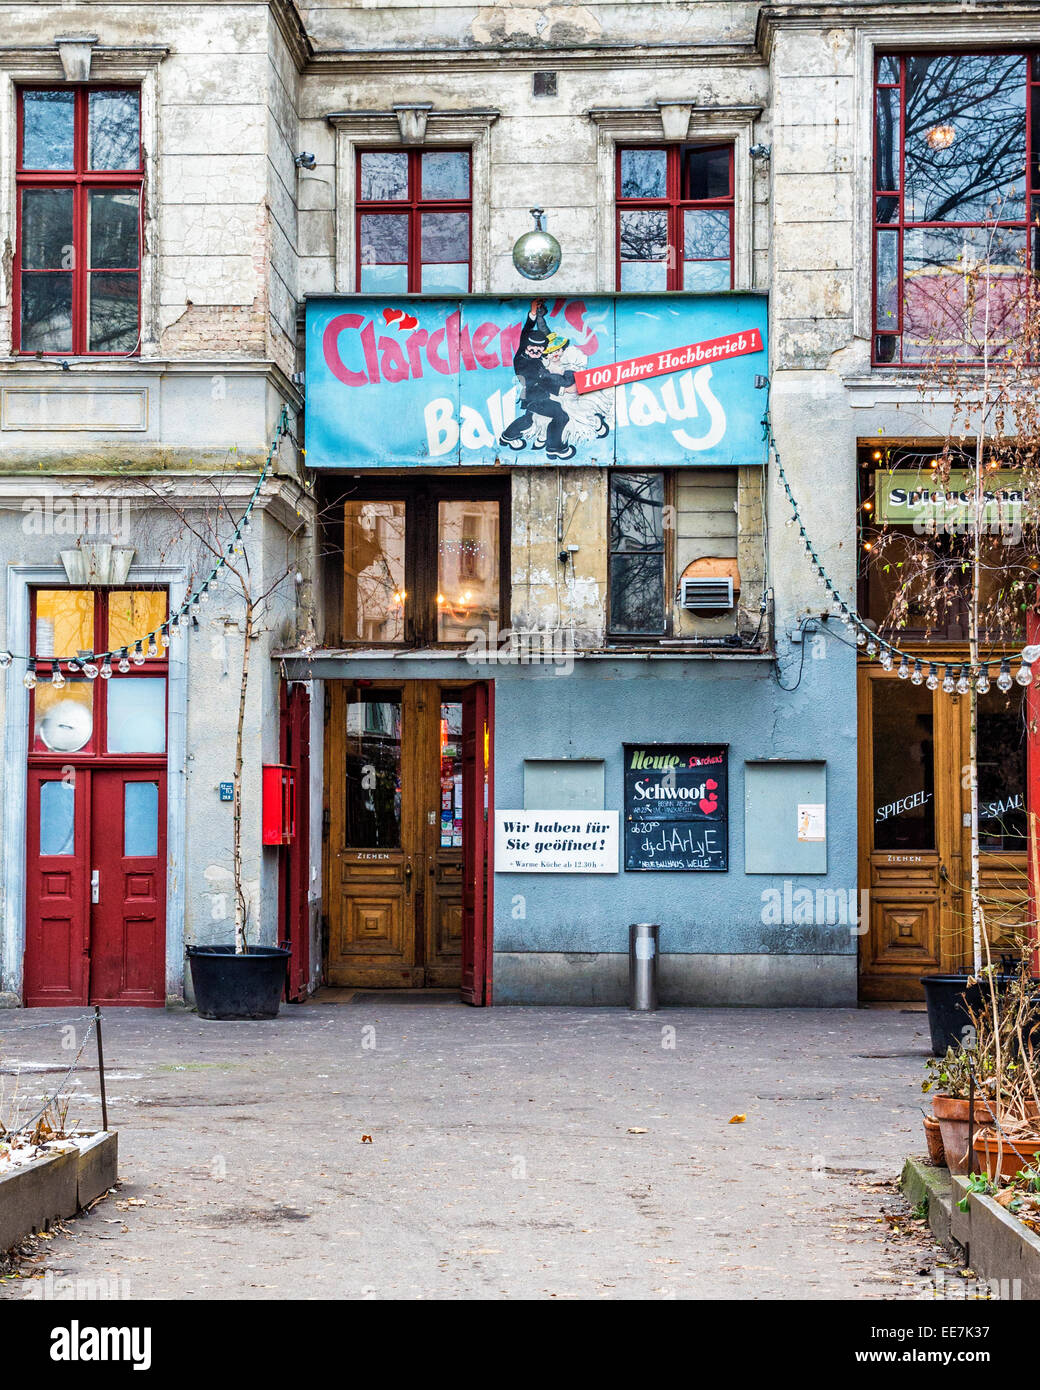 Clärchens Ballhaus, ball room, dance hall and restaurant in dilapidated building in Auguststrasse, Mitte, Berlin Stock Photo